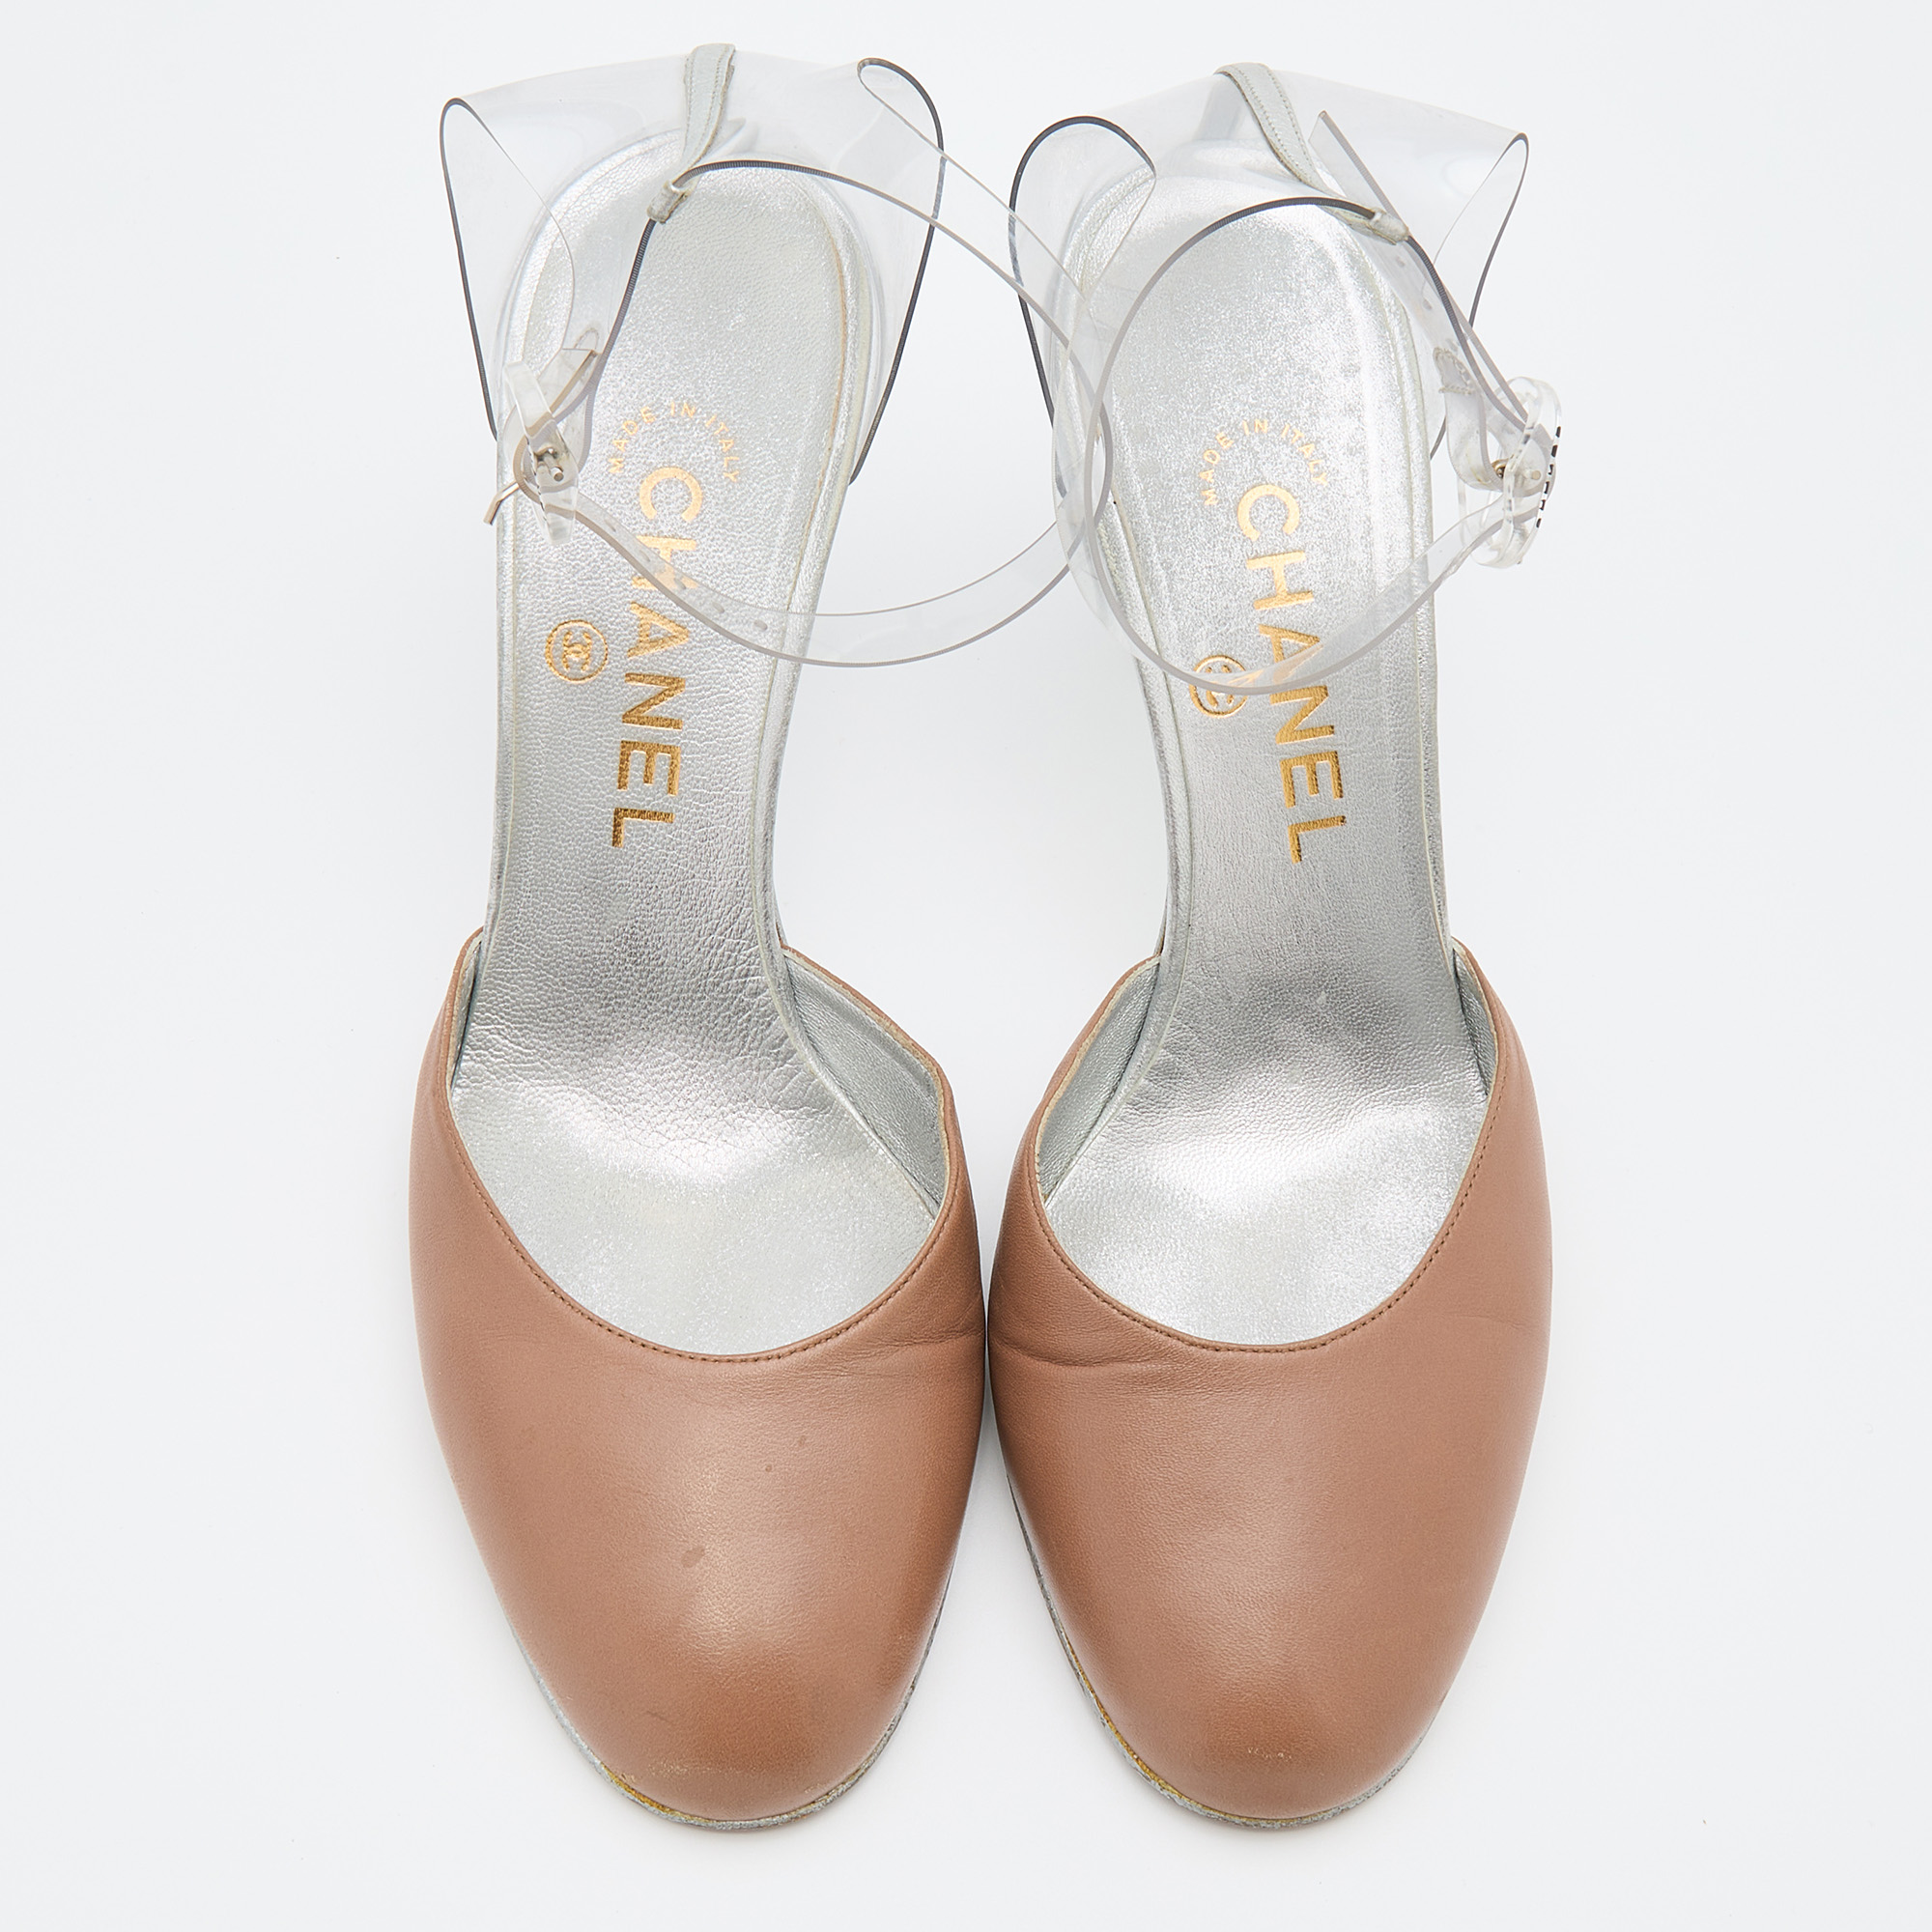 Chanel Beige/Transparent Leather And PVC Ankle Strap Pumps Size 38